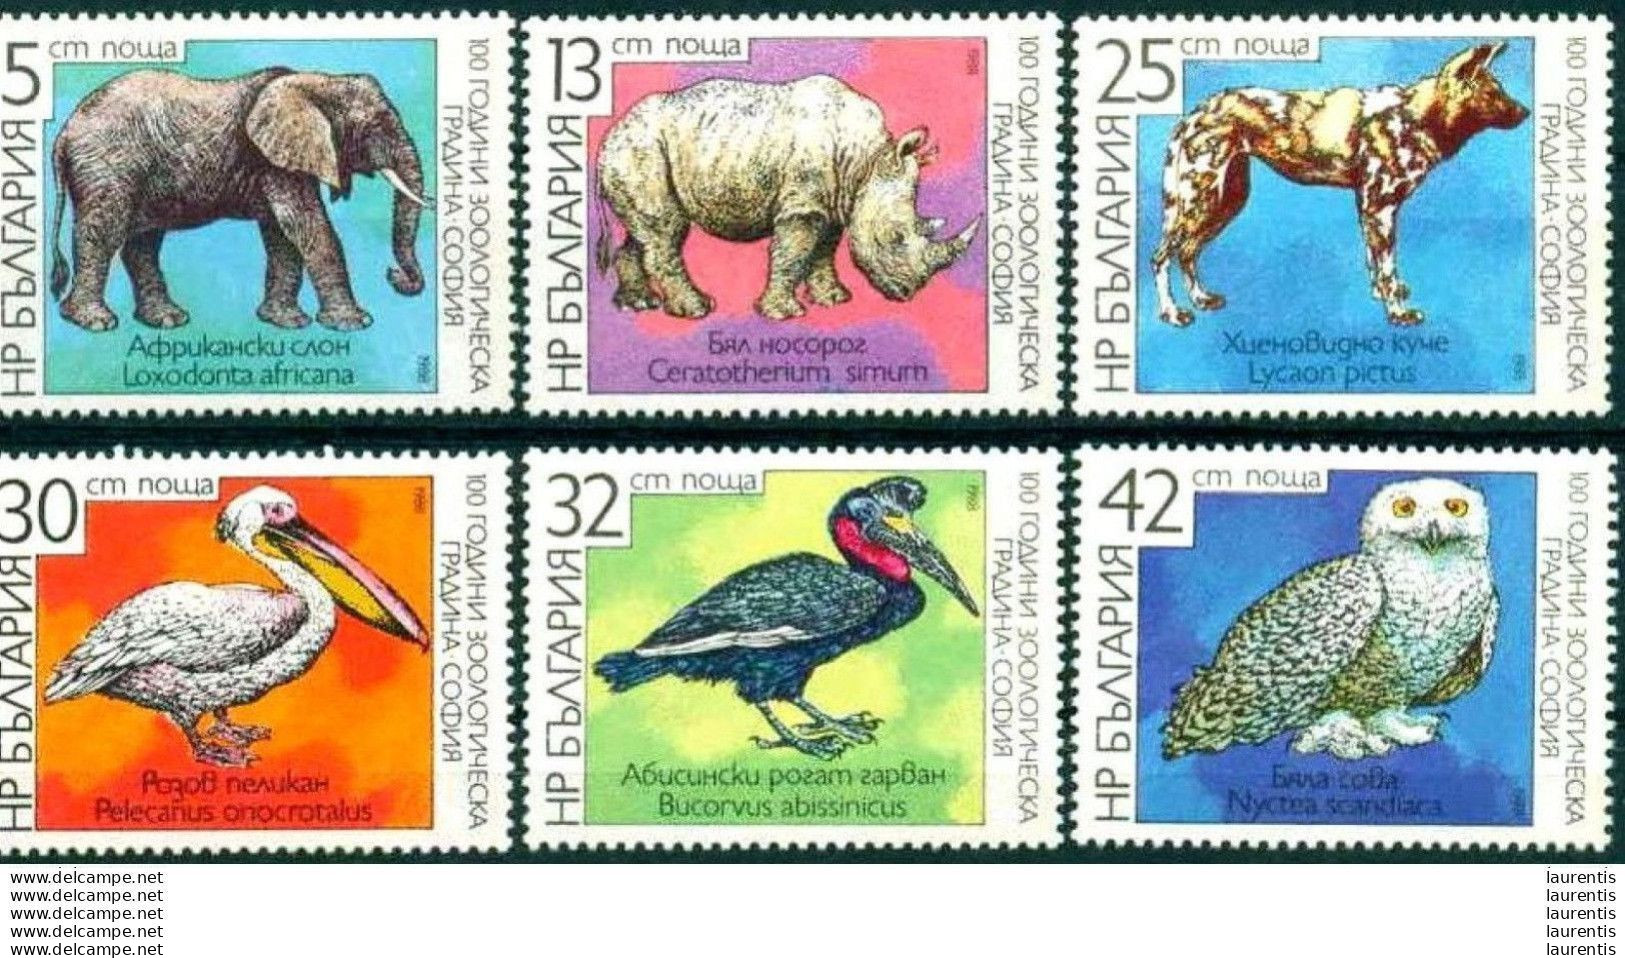 D2861  Owls -  Elefants - BIrds - Zoo - Bulgaria Yv 3268-73 MNH - Shipping To Any Country 0,75€ - 1,35 (x-40-190) - Owls